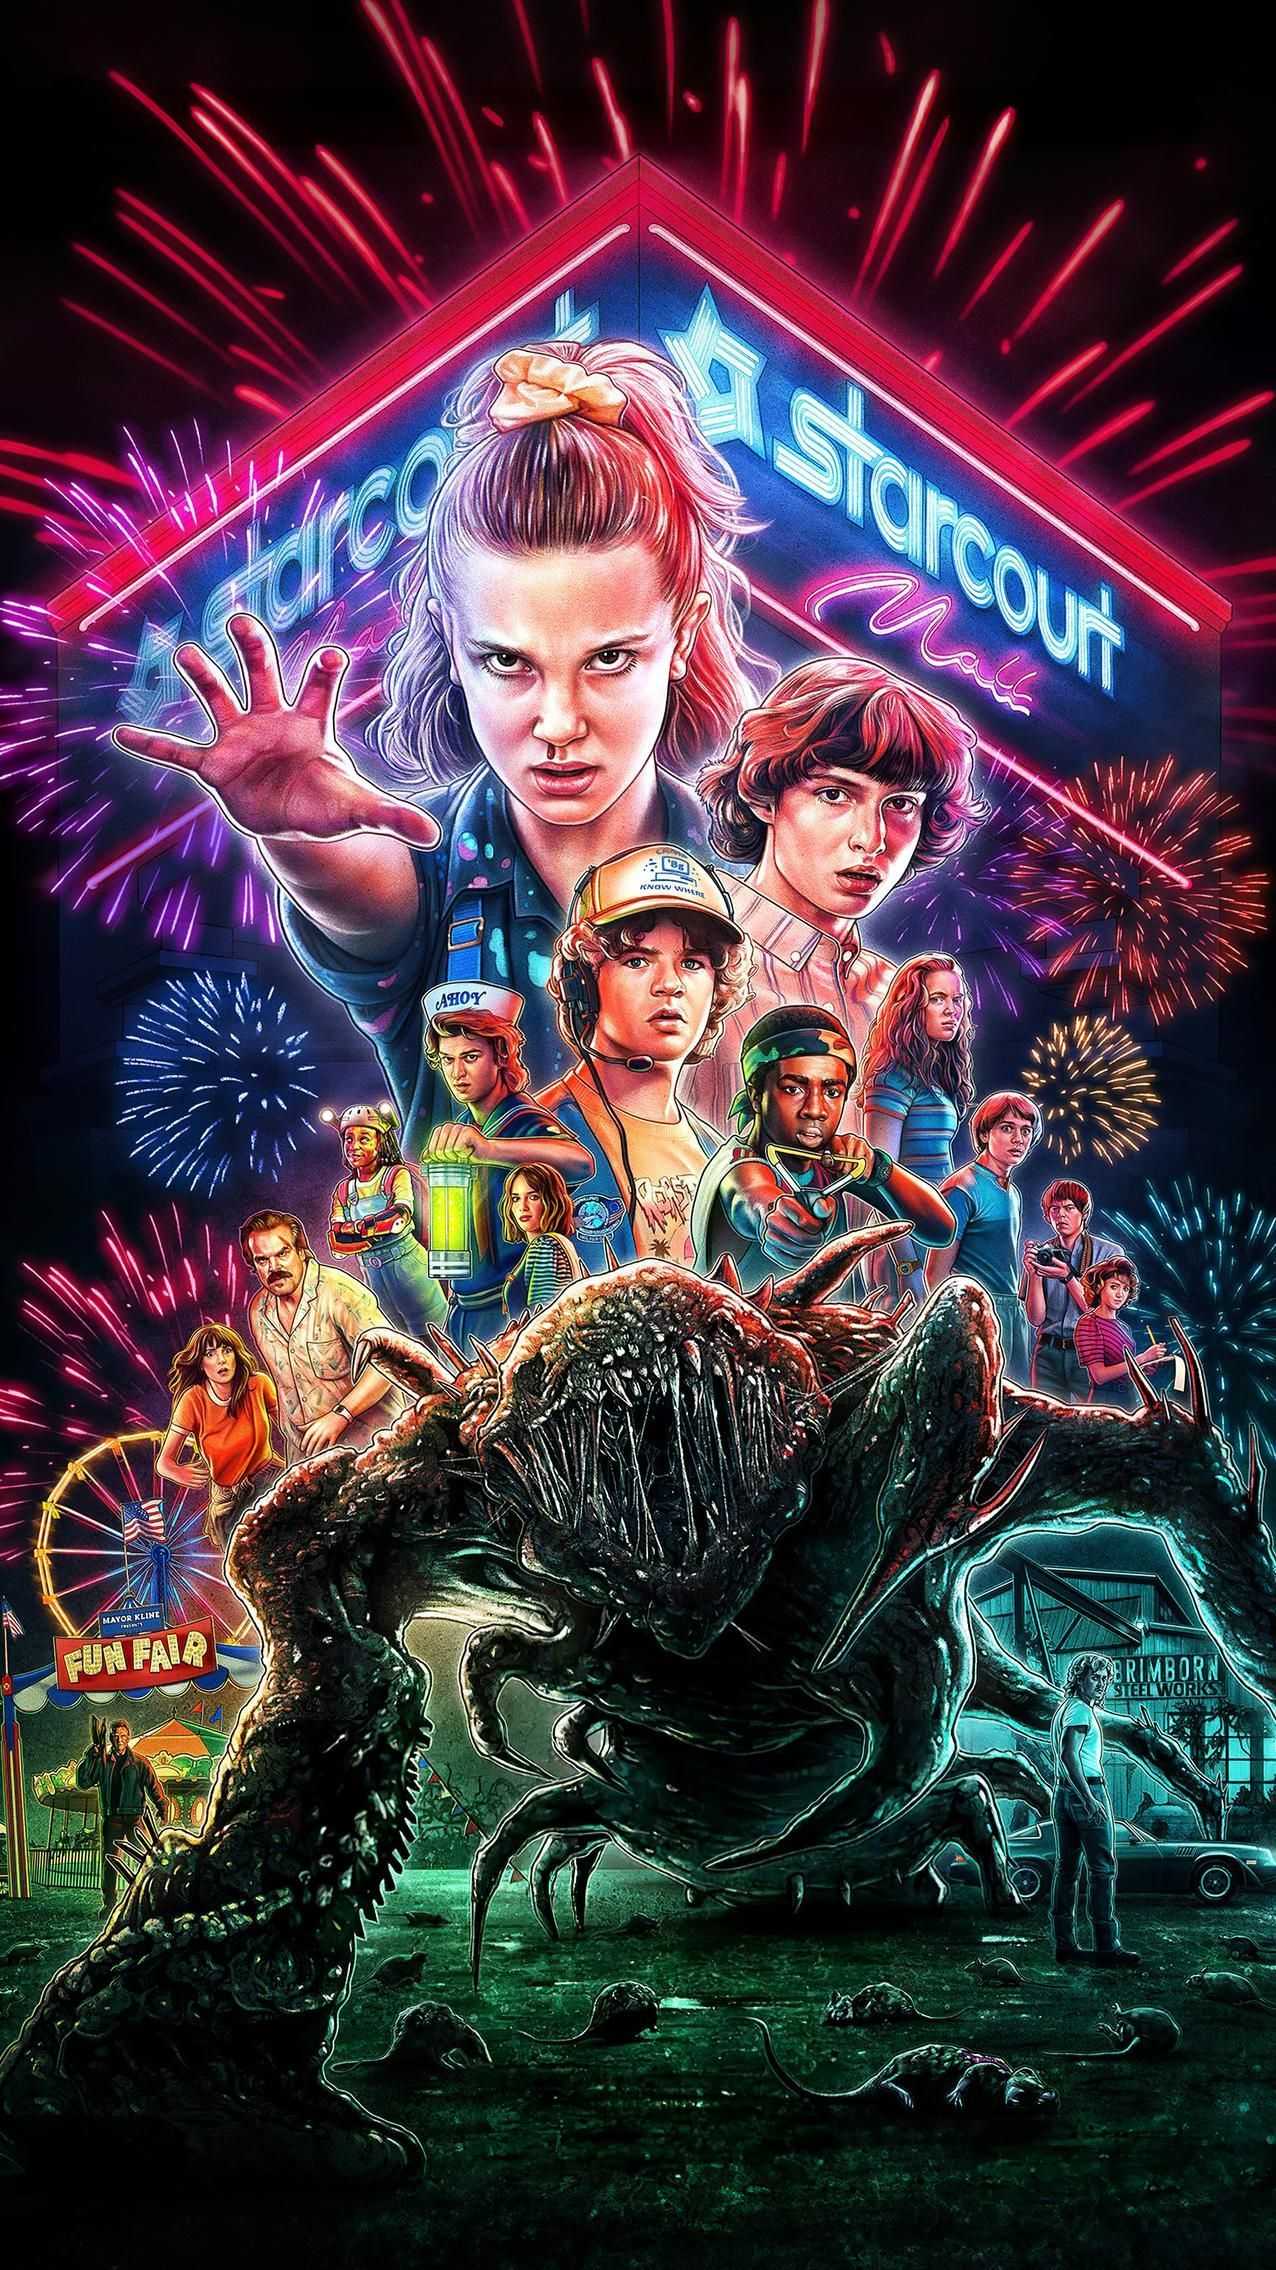 Stranger Things iPhone Wallpaper with high-resolution 1080x1920 pixel. You can use this wallpaper for your iPhone 5, 6, 7, 8, X, XS, XR backgrounds, Mobile Screensaver, or iPad Lock Screen - Stranger Things